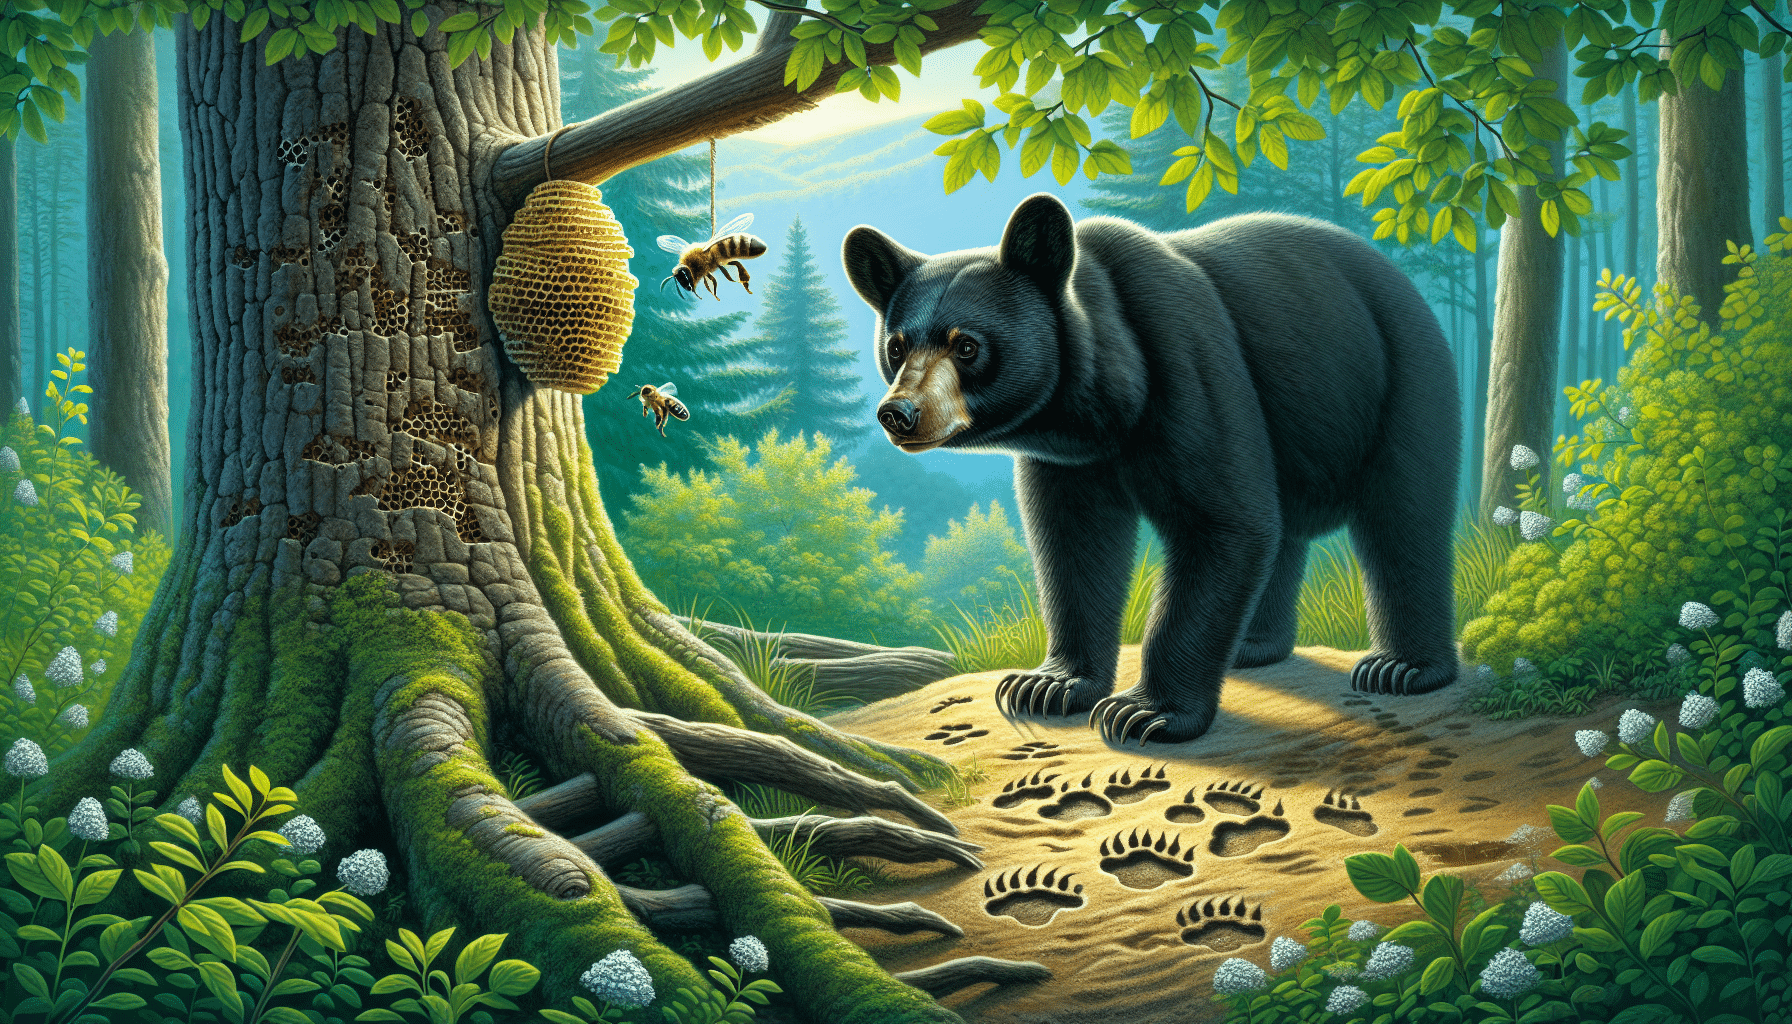 An image depicting a black bear in its natural habitat. The bear is curiously investigating a beehive hanging from a tree, showing its natural instincts. Nearby, visible in the lush green environment are evidence of its presence, such as pawprints in the soft ground and scratched tree barks. The bear, though represented inquisitively, should also reflect a degree of strength and wildness to subtly convey the potential danger of these creatures. Remember to avoid including any text, brand names, logos, or humans in the image.